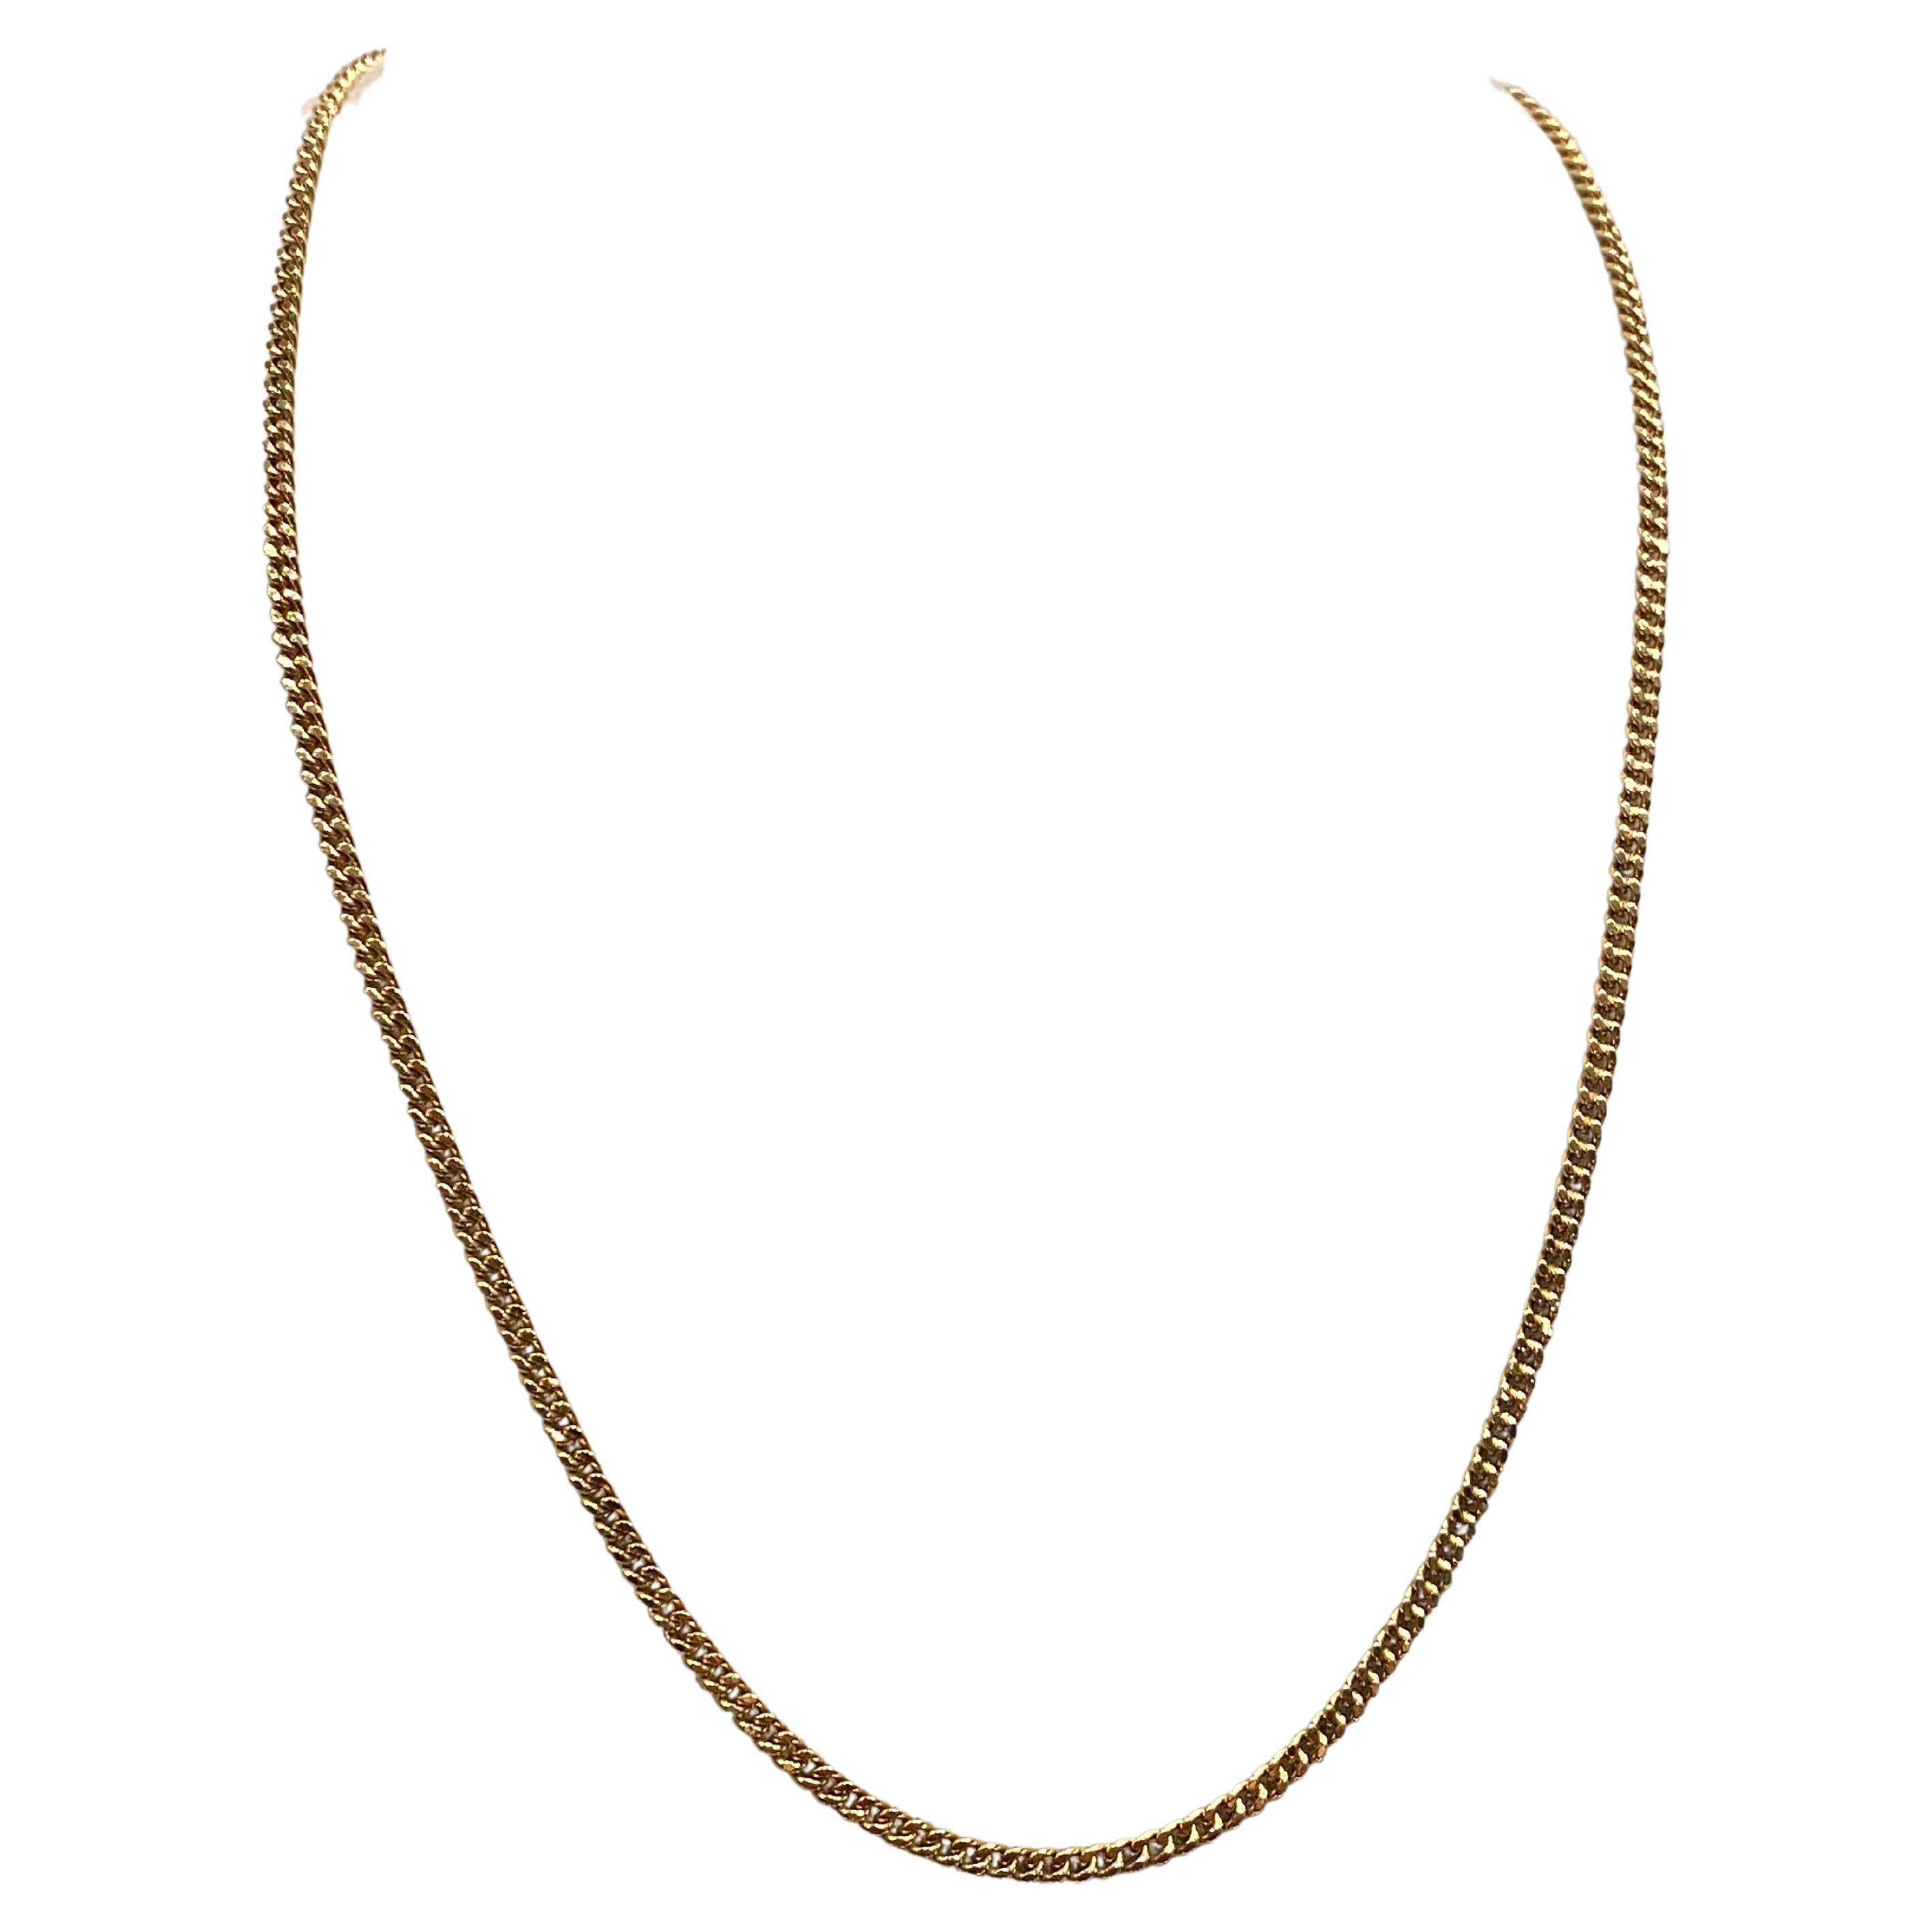  18K 750 Yellow Gold Fine Cuban / Curb Links Chain, 50.5cm, 15.6gr. Italy, c1990 For Sale